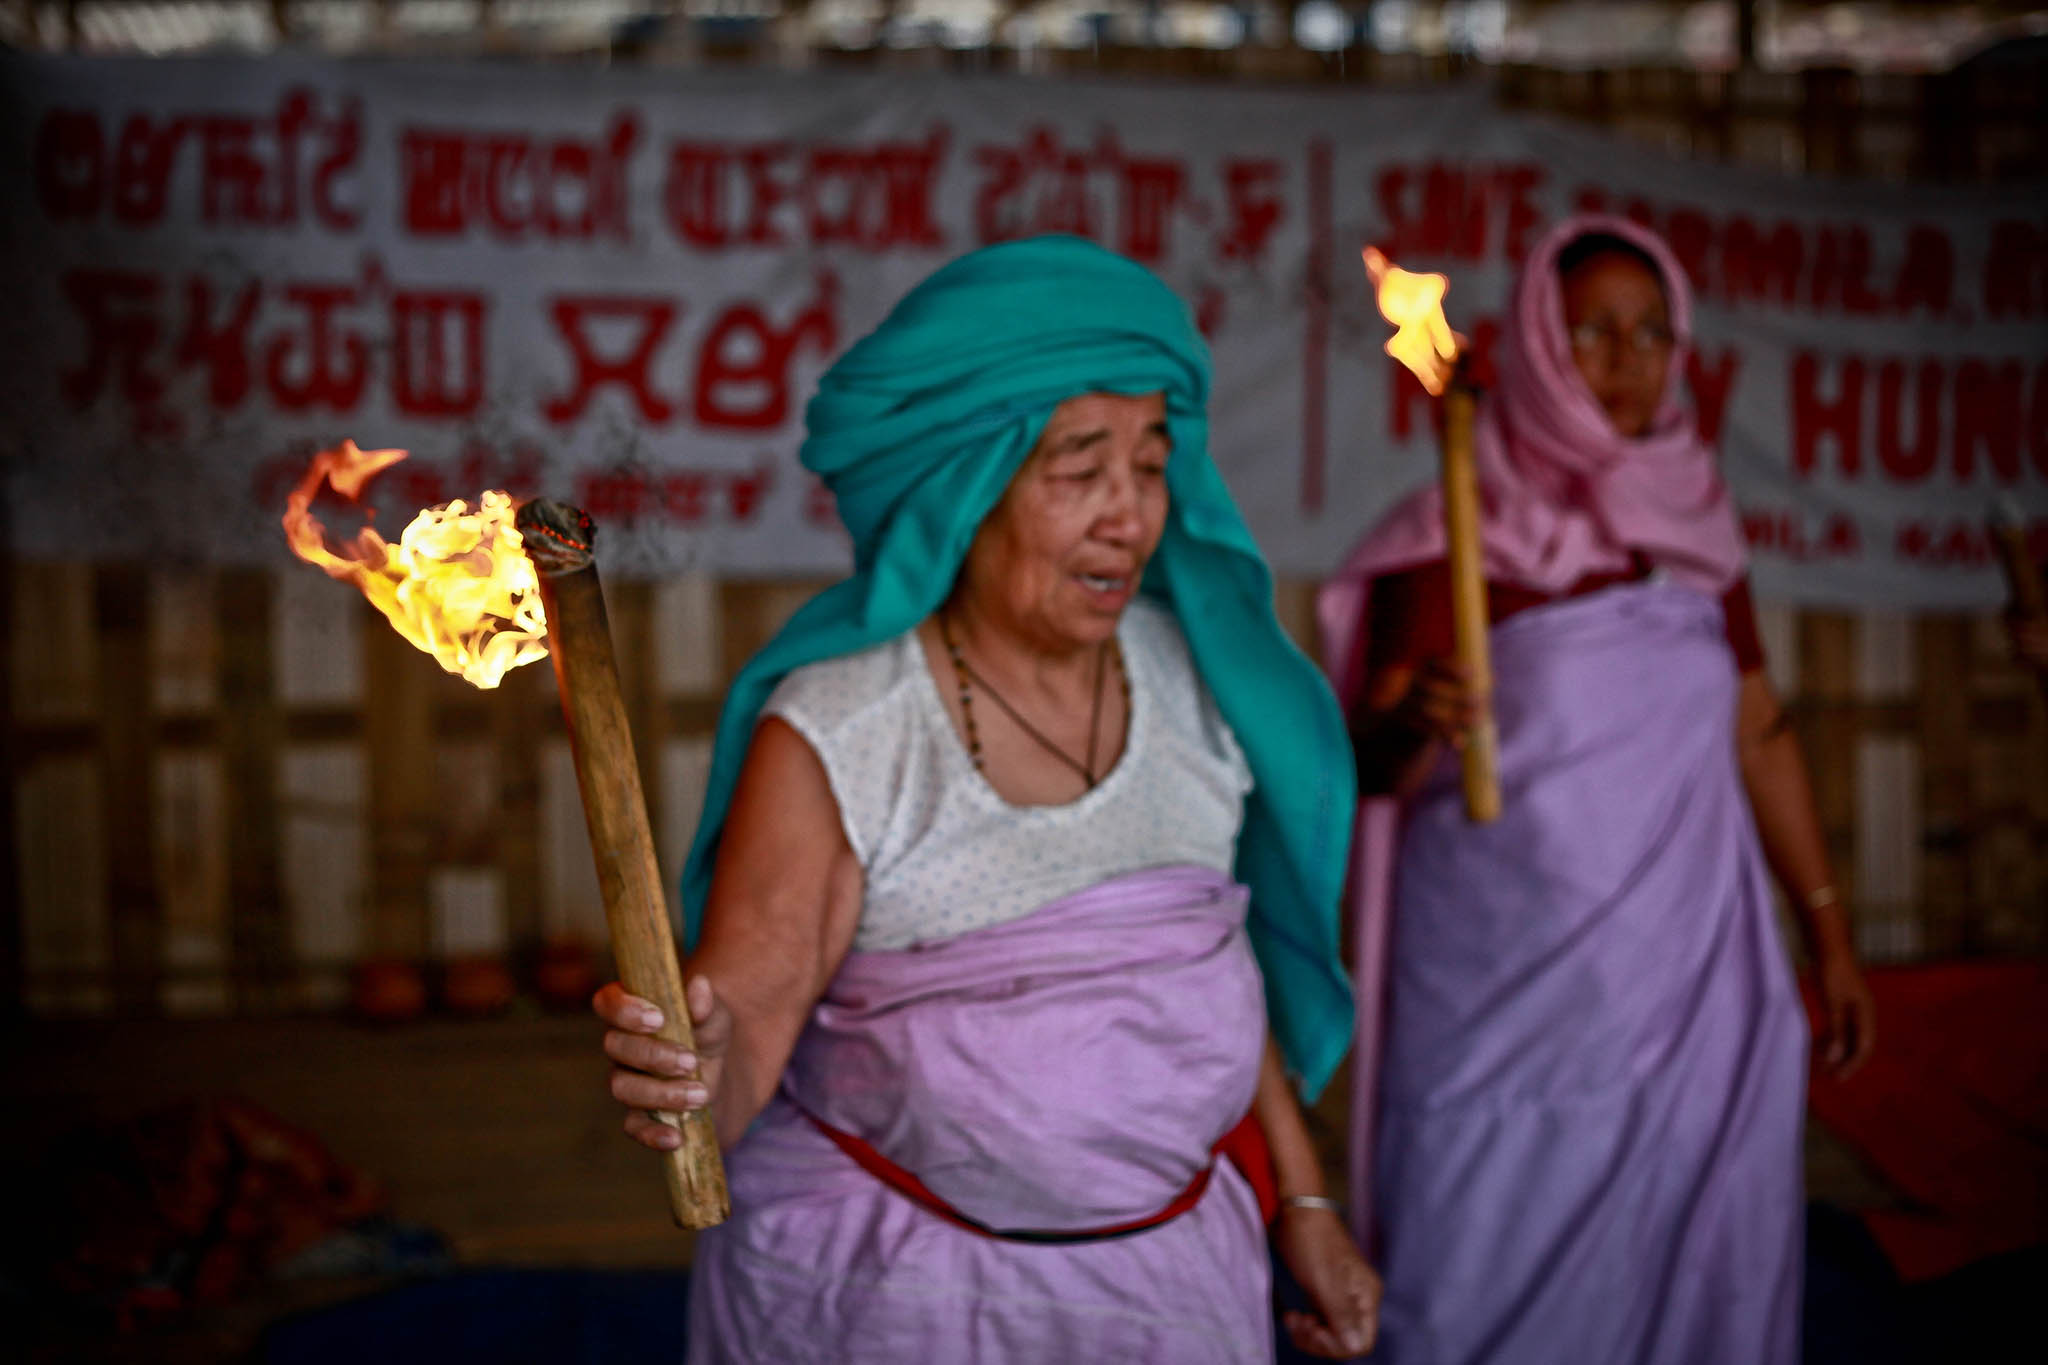 A woman participates in the Meira Paibi movement in Imphal in the Manipur region of India. March 10, 2009. (lecercle/Flickr)